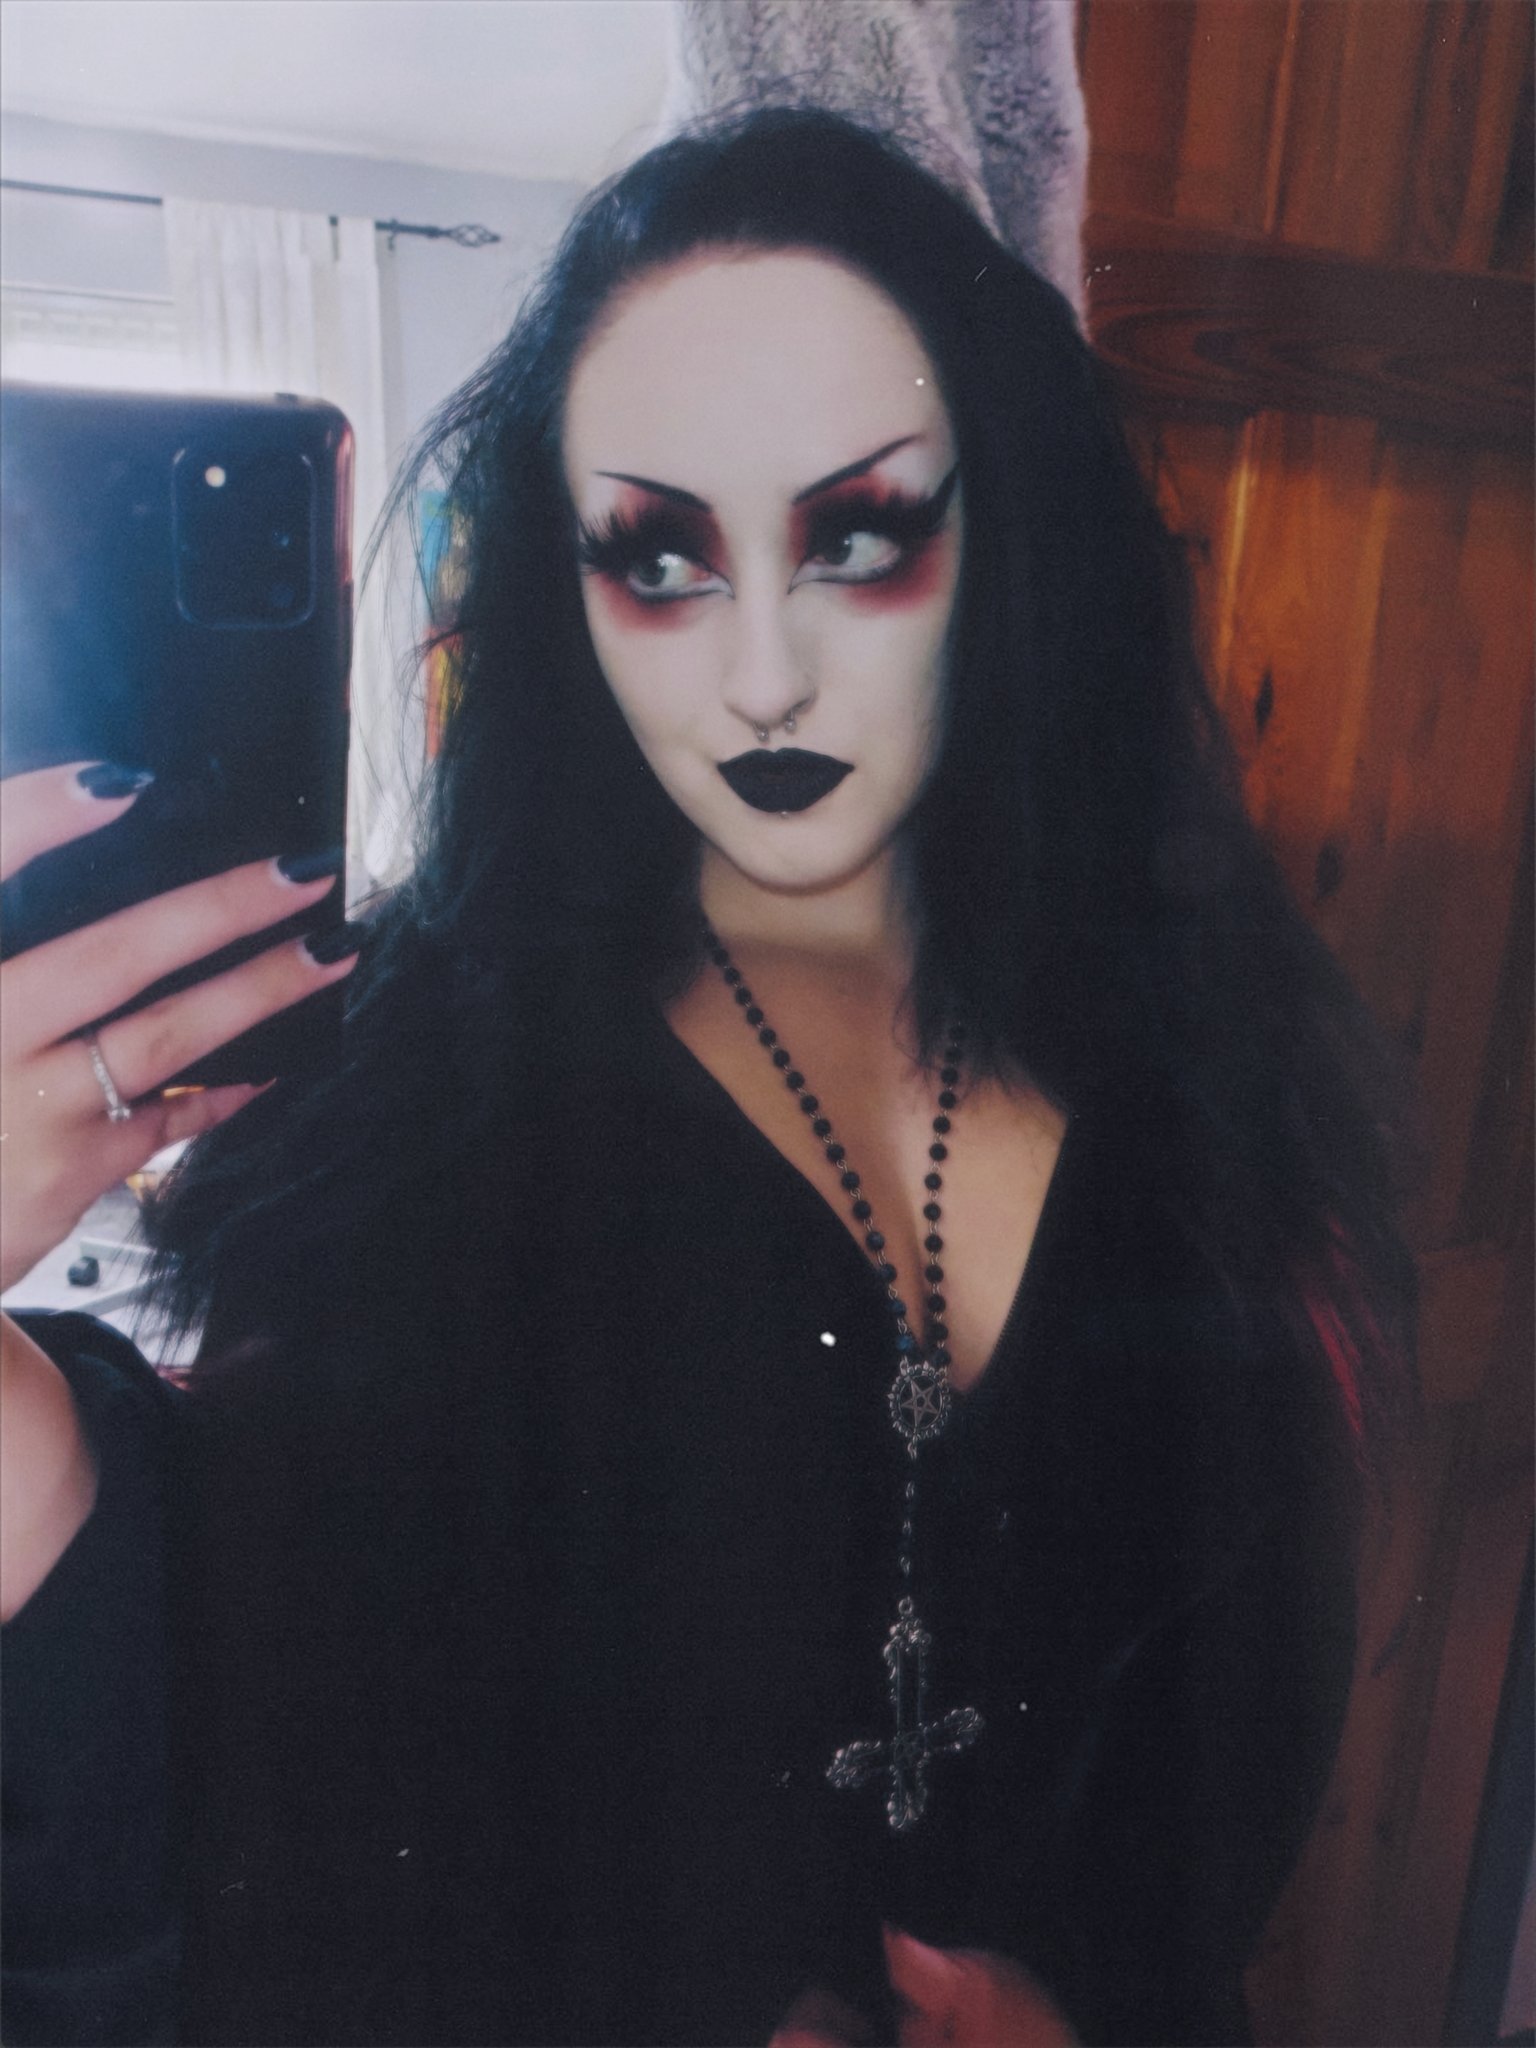 𝖓𝖞𝖒𝖕𝖍𝖊𝖙𝖆𝖒𝖎𝖓𝖊 𝖇𝖎𝖙𝖈𝖍. 🌙 on X: Tried a more trad goth  make up look today 🦇  / X